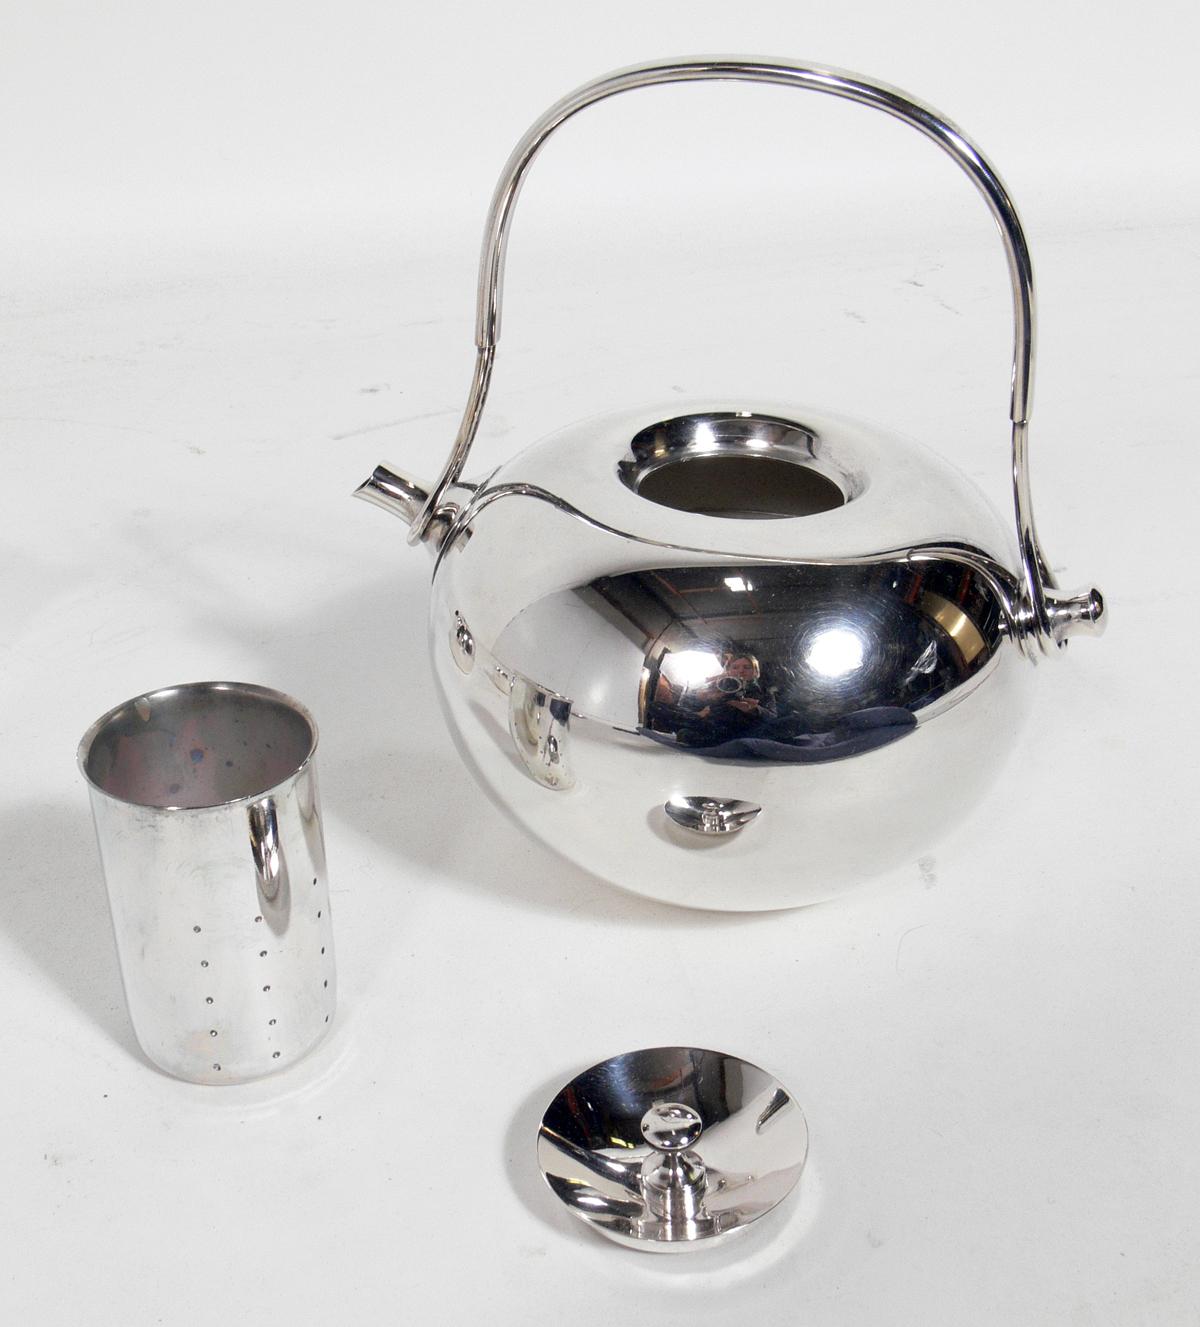 Danish modern tea service, designed by Vivianna Torun Bülow-Hübe for Dansk International Designs, Ltd, Sweden, circa 1960s. It is constructed of silver plated brass. It has recently been hand polished. The service includes one tray, tea pot, sugar